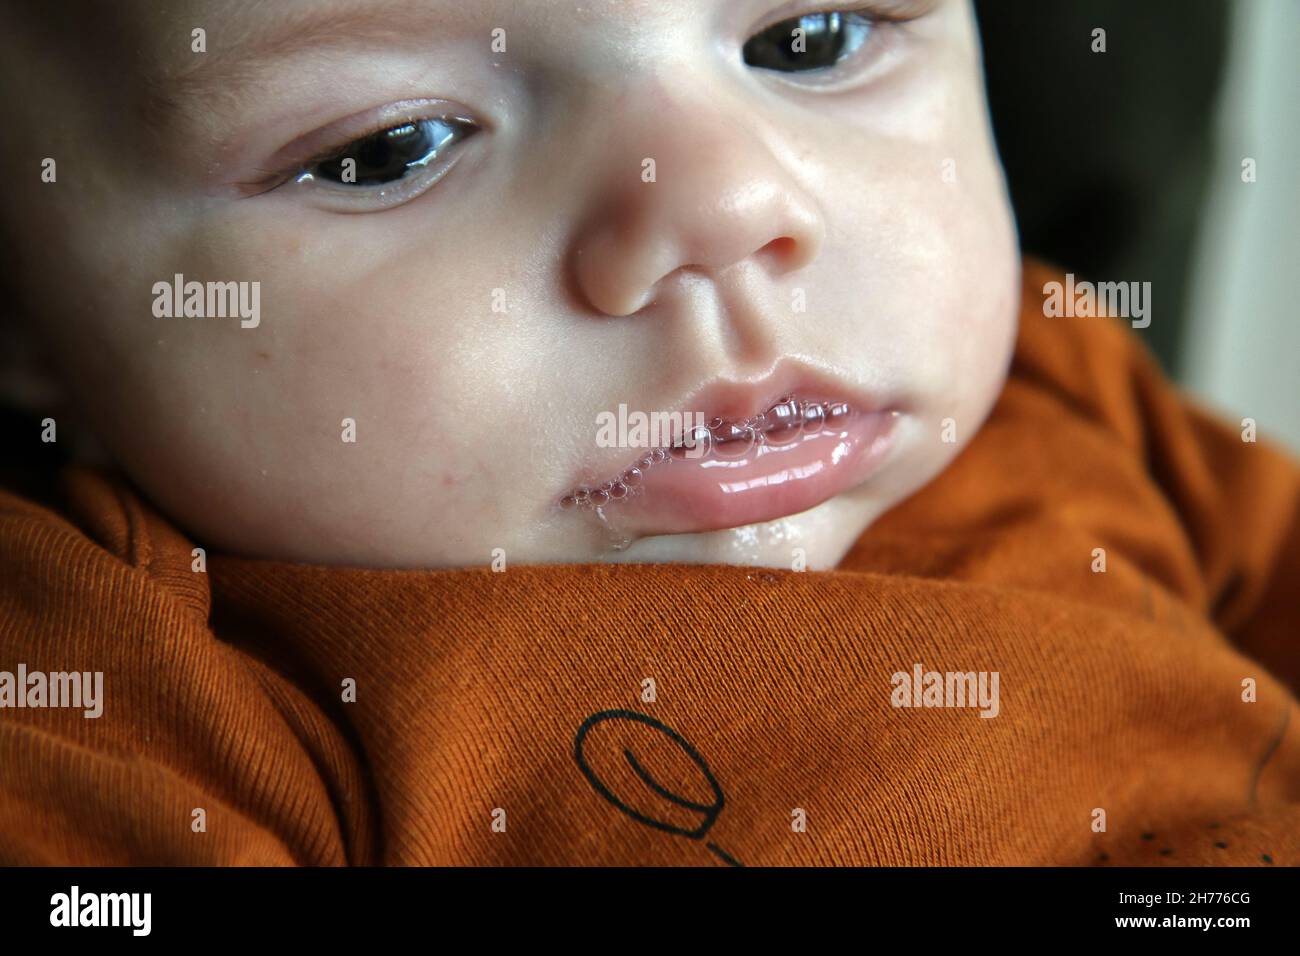 The detail of the baby having foam from the slaver on its mouth. Looking unhappy and absorbed in thoughts. Stock Photo